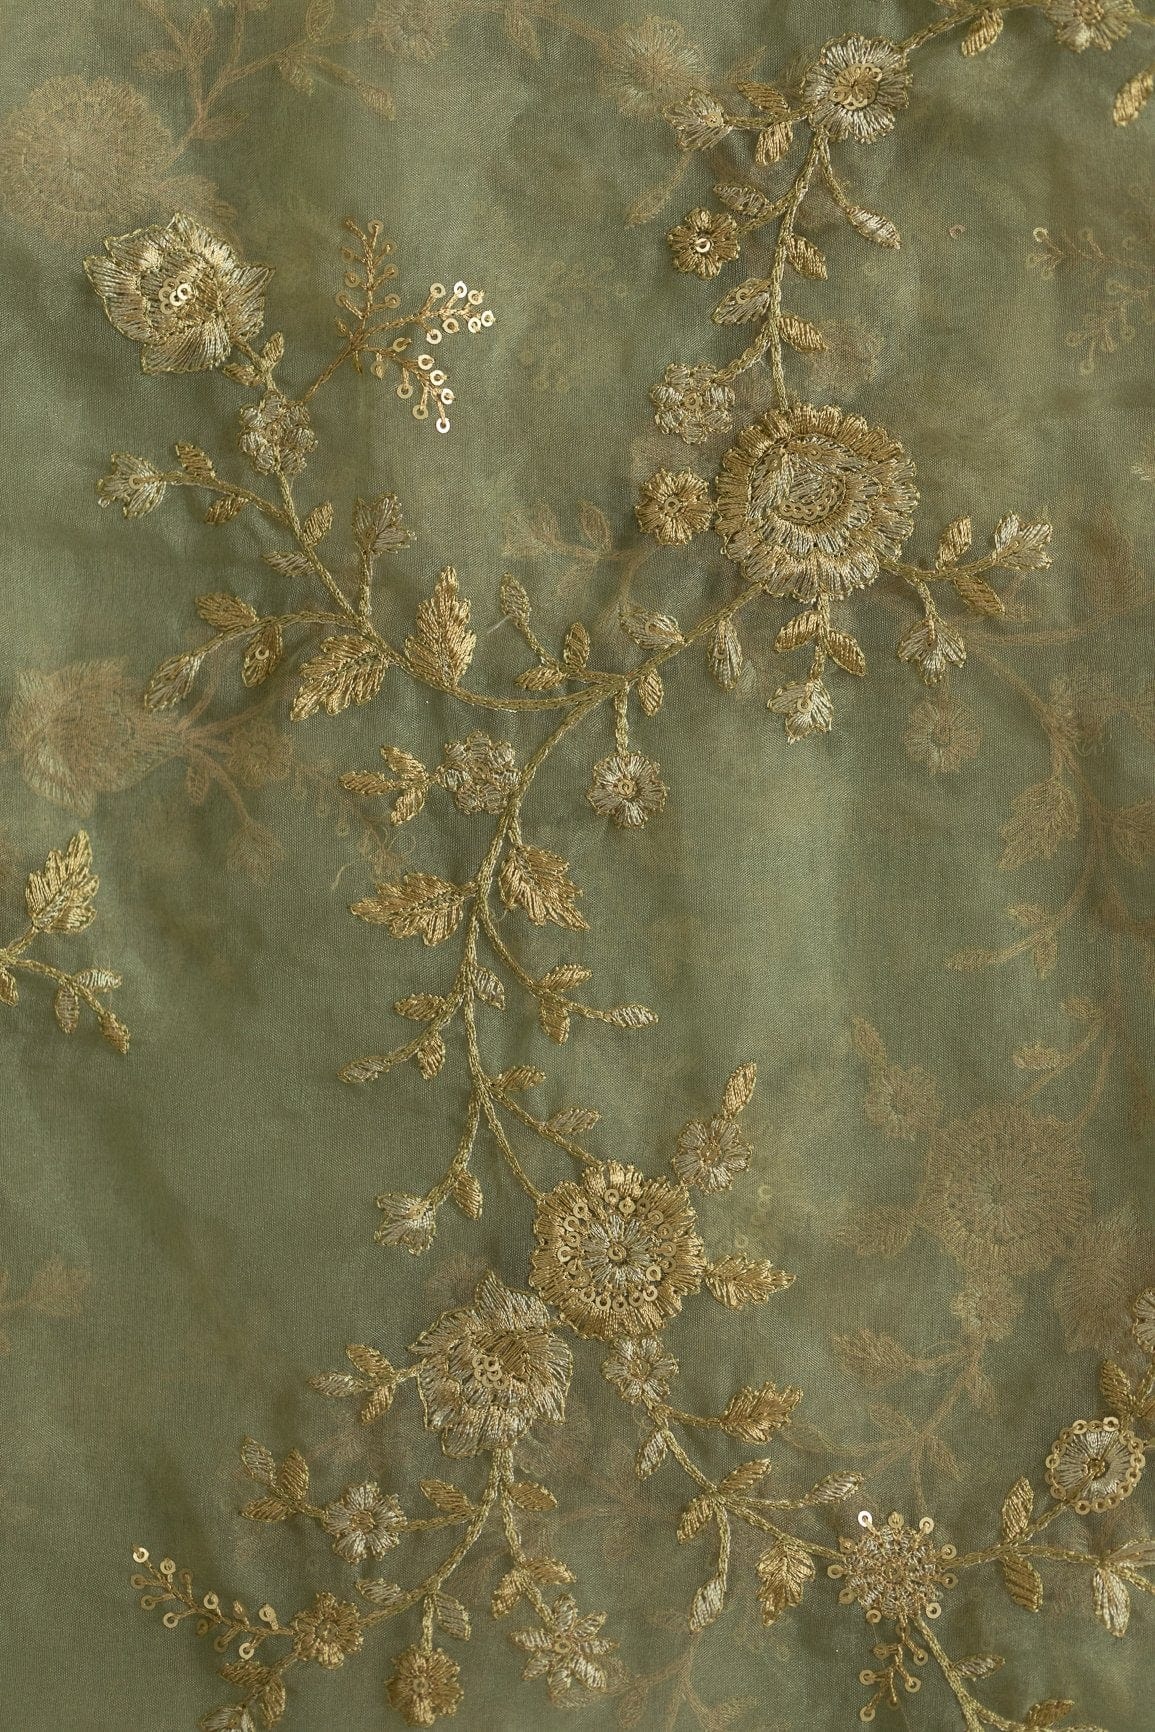 doeraa Embroidery Fabrics 1 Metre Cut Piece of Gold And Light Green Thread With Gold Sequins Embroidery On Olive Organza Fabric